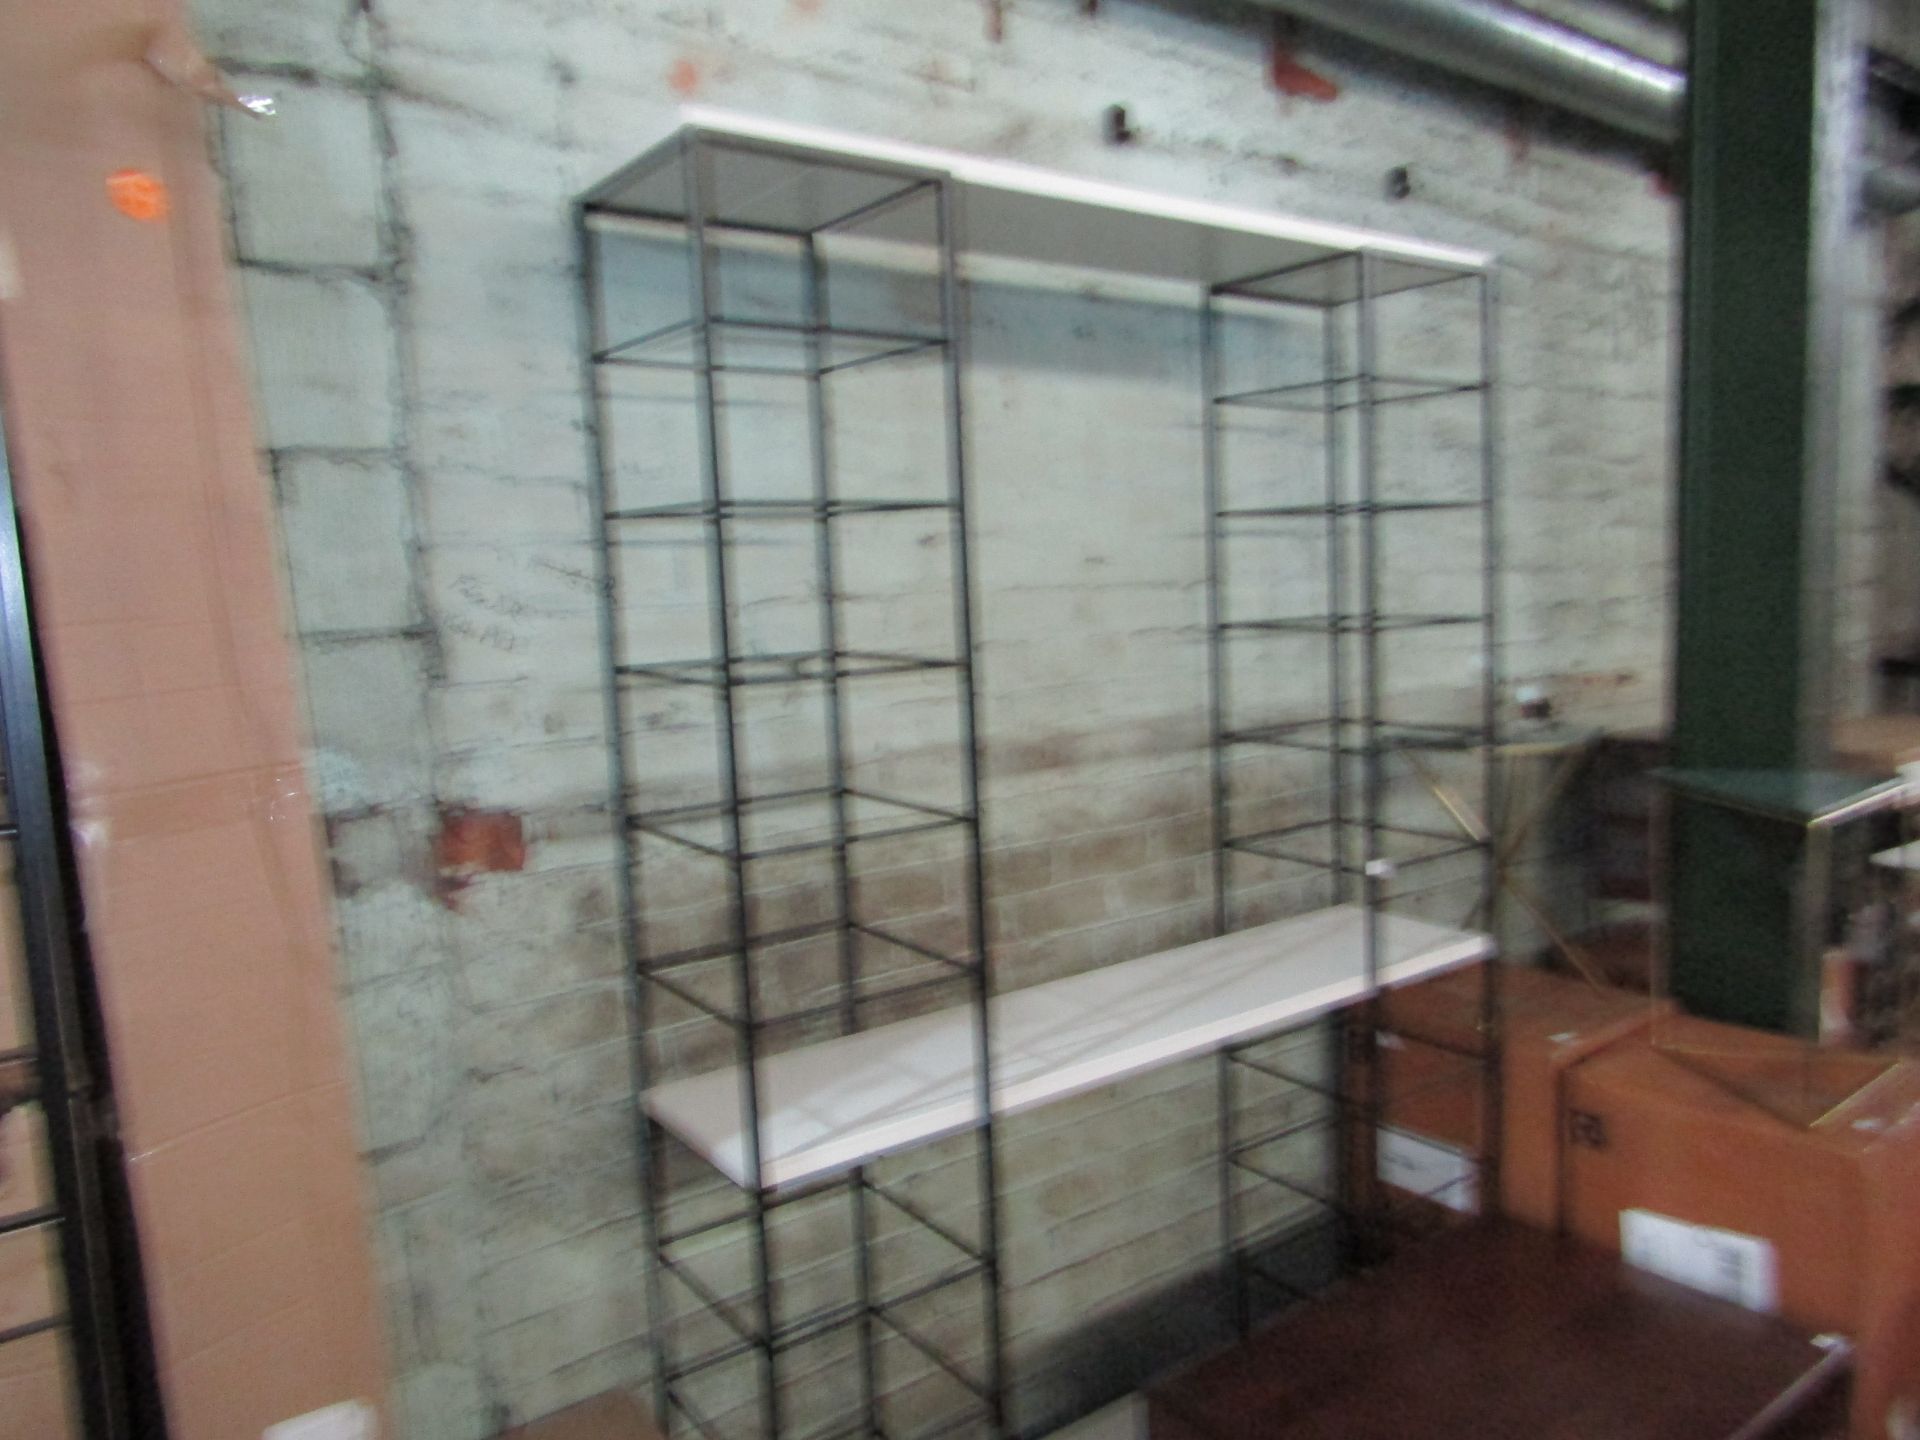 Lot 150 is for 2 Items from Heals total RRP Â£778 Lot includes: Heals Tower Shelving Tall Module